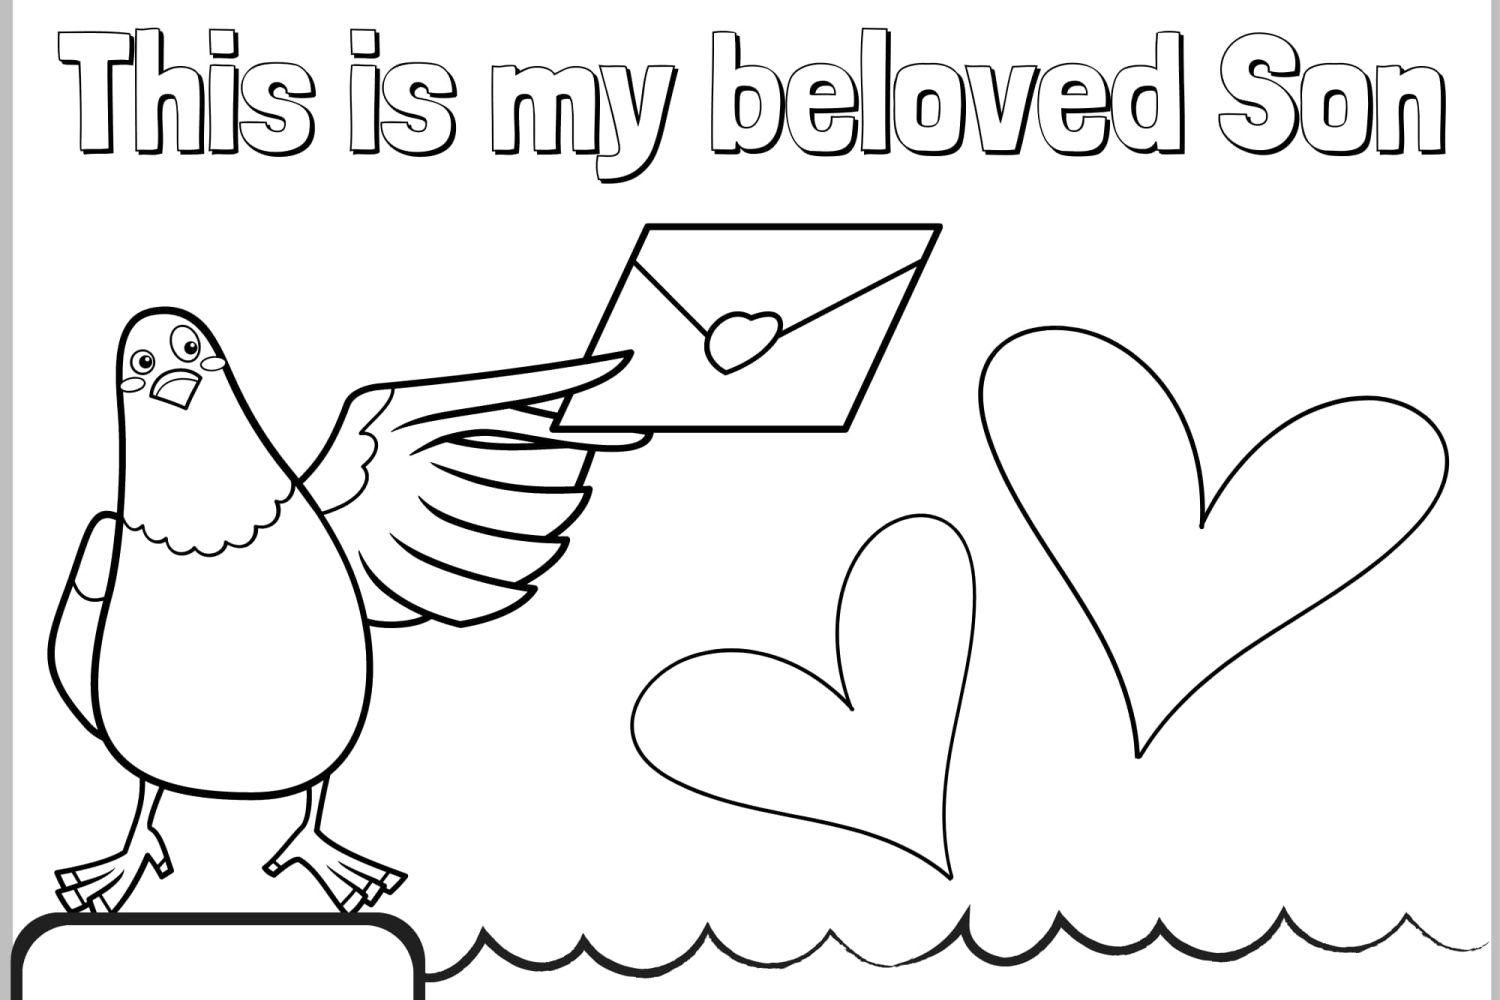 Colouring%20page%20-%20My%20beloved%20son-ce43538c Matthew